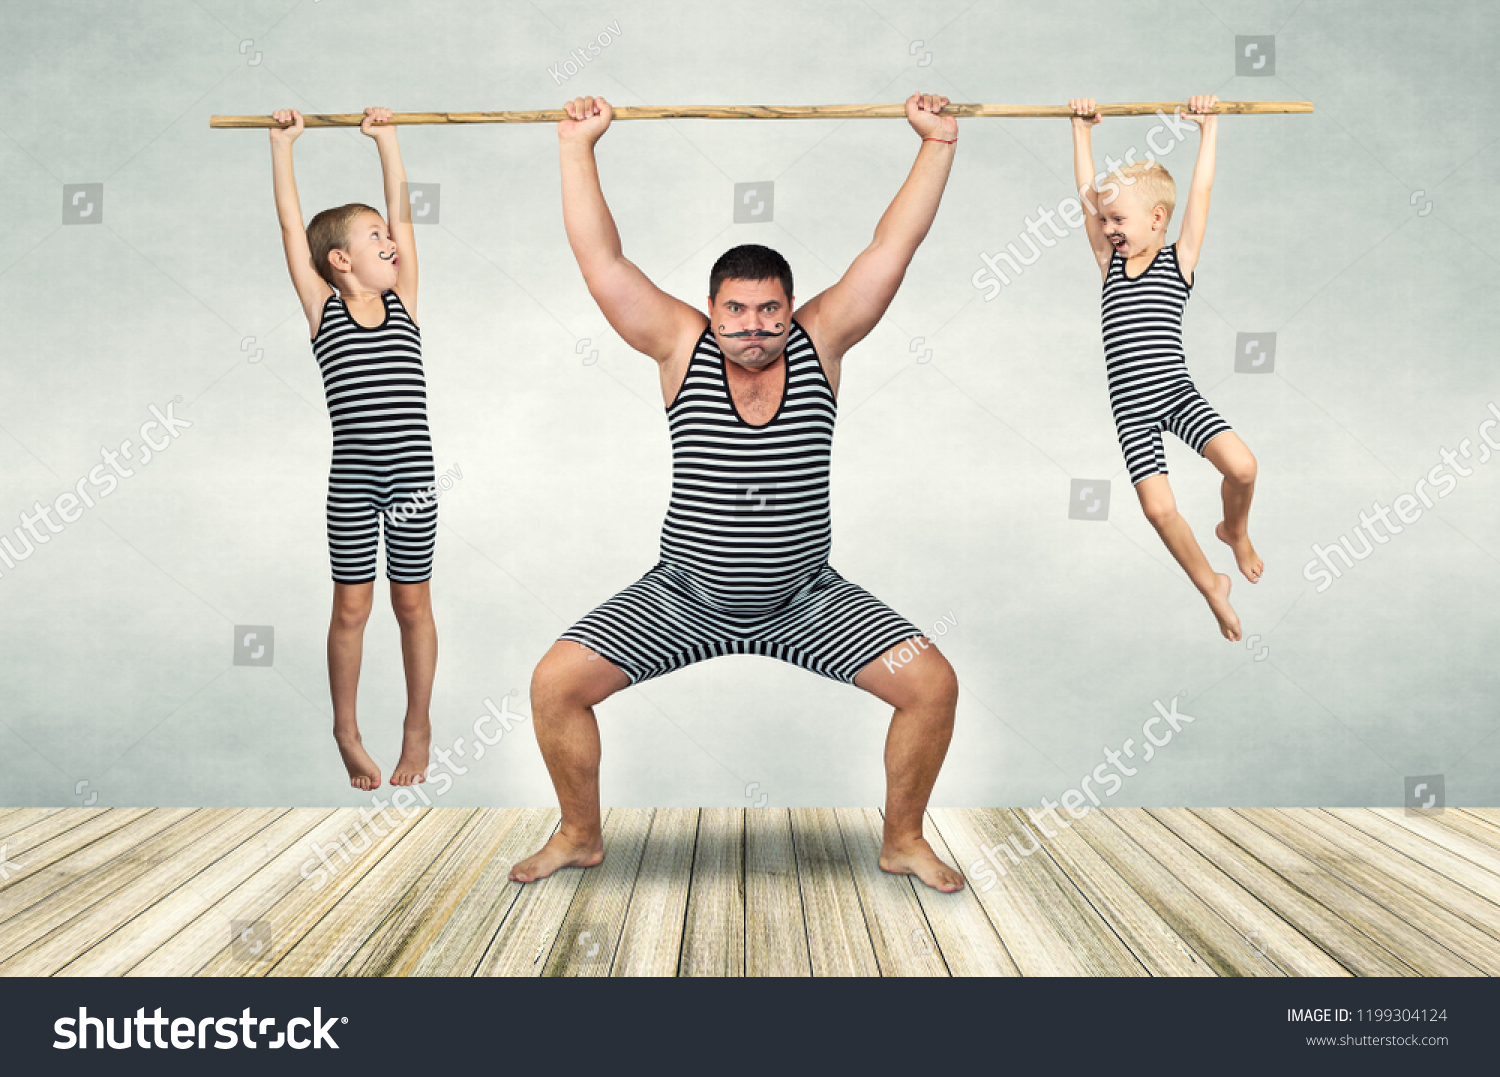 Family of strongman. The father of two sons in vintage costume of athletes perform strength exercises. Family look. #1199304124